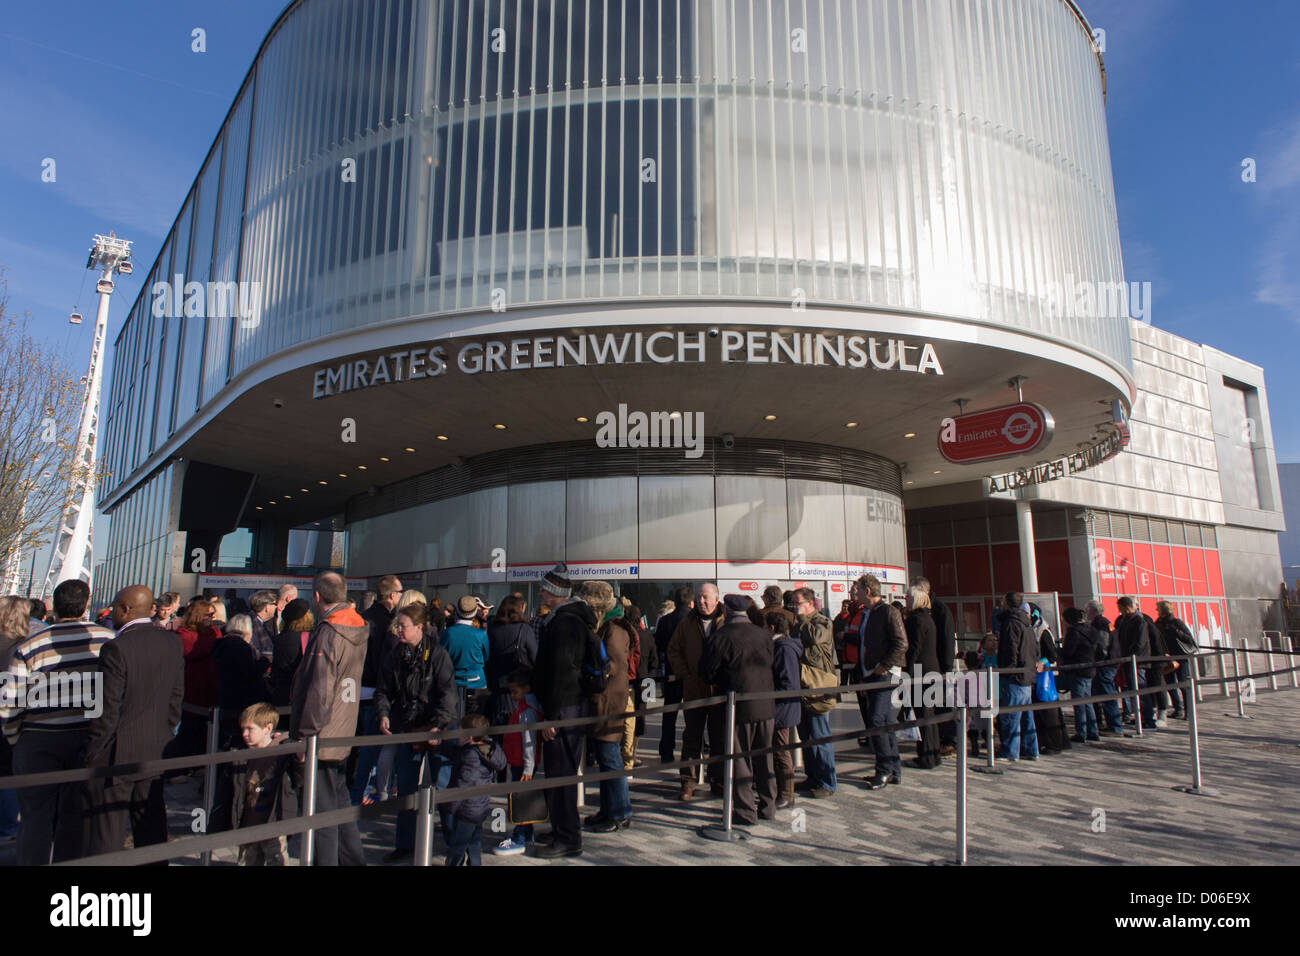 Passengers queue at the southern Greenwich Peninsular terminus of the (Emirates) Thames Cable Car, London. There are 34 gondolas, each with a maximum capacity of 10 passengers. The Emirates Air Line (also known as the Thames cable car) is a cable car link across the River Thames in London built with sponsorship from the airline Emirates. The service opened on 28 June 2012 and is operated by Transport for London. Stock Photo